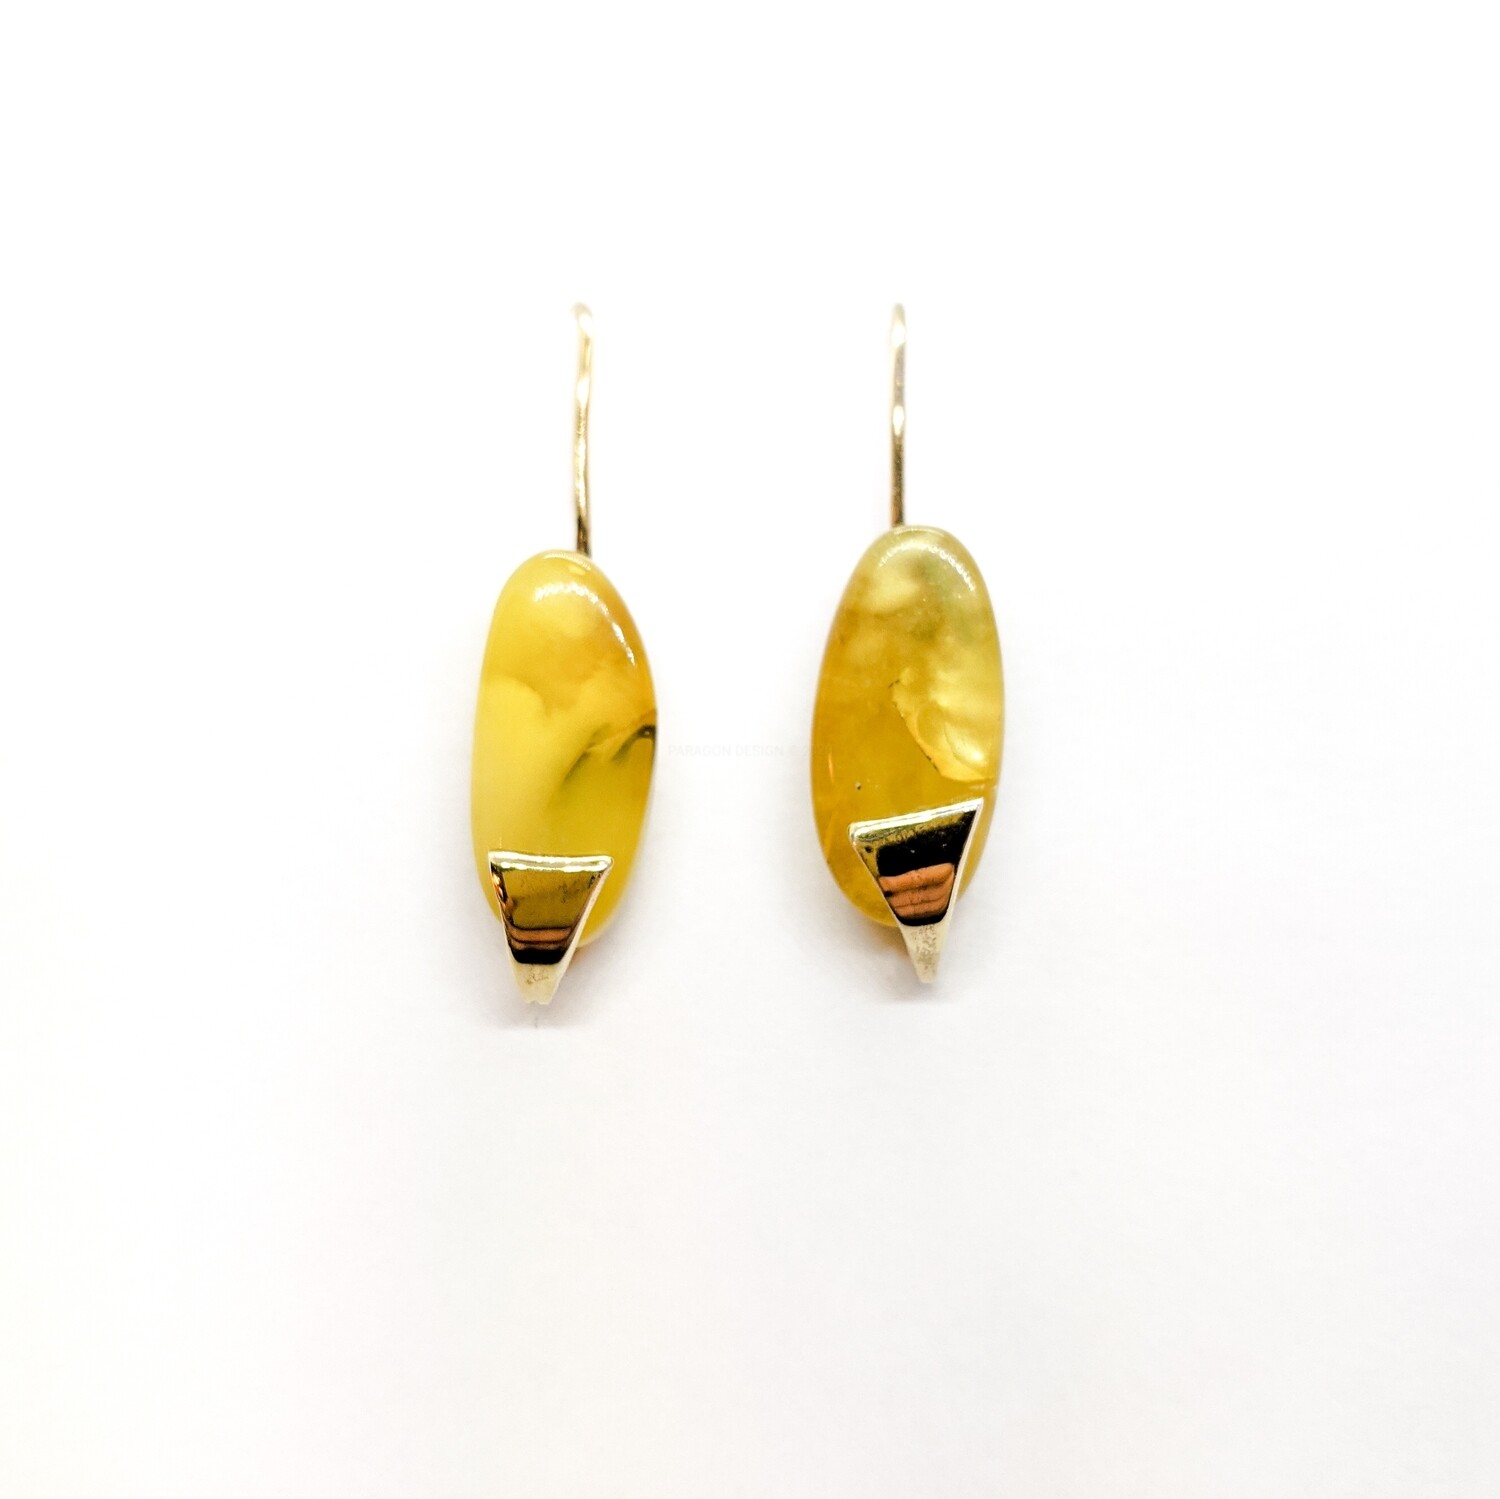 Silver gilded earrings with amber